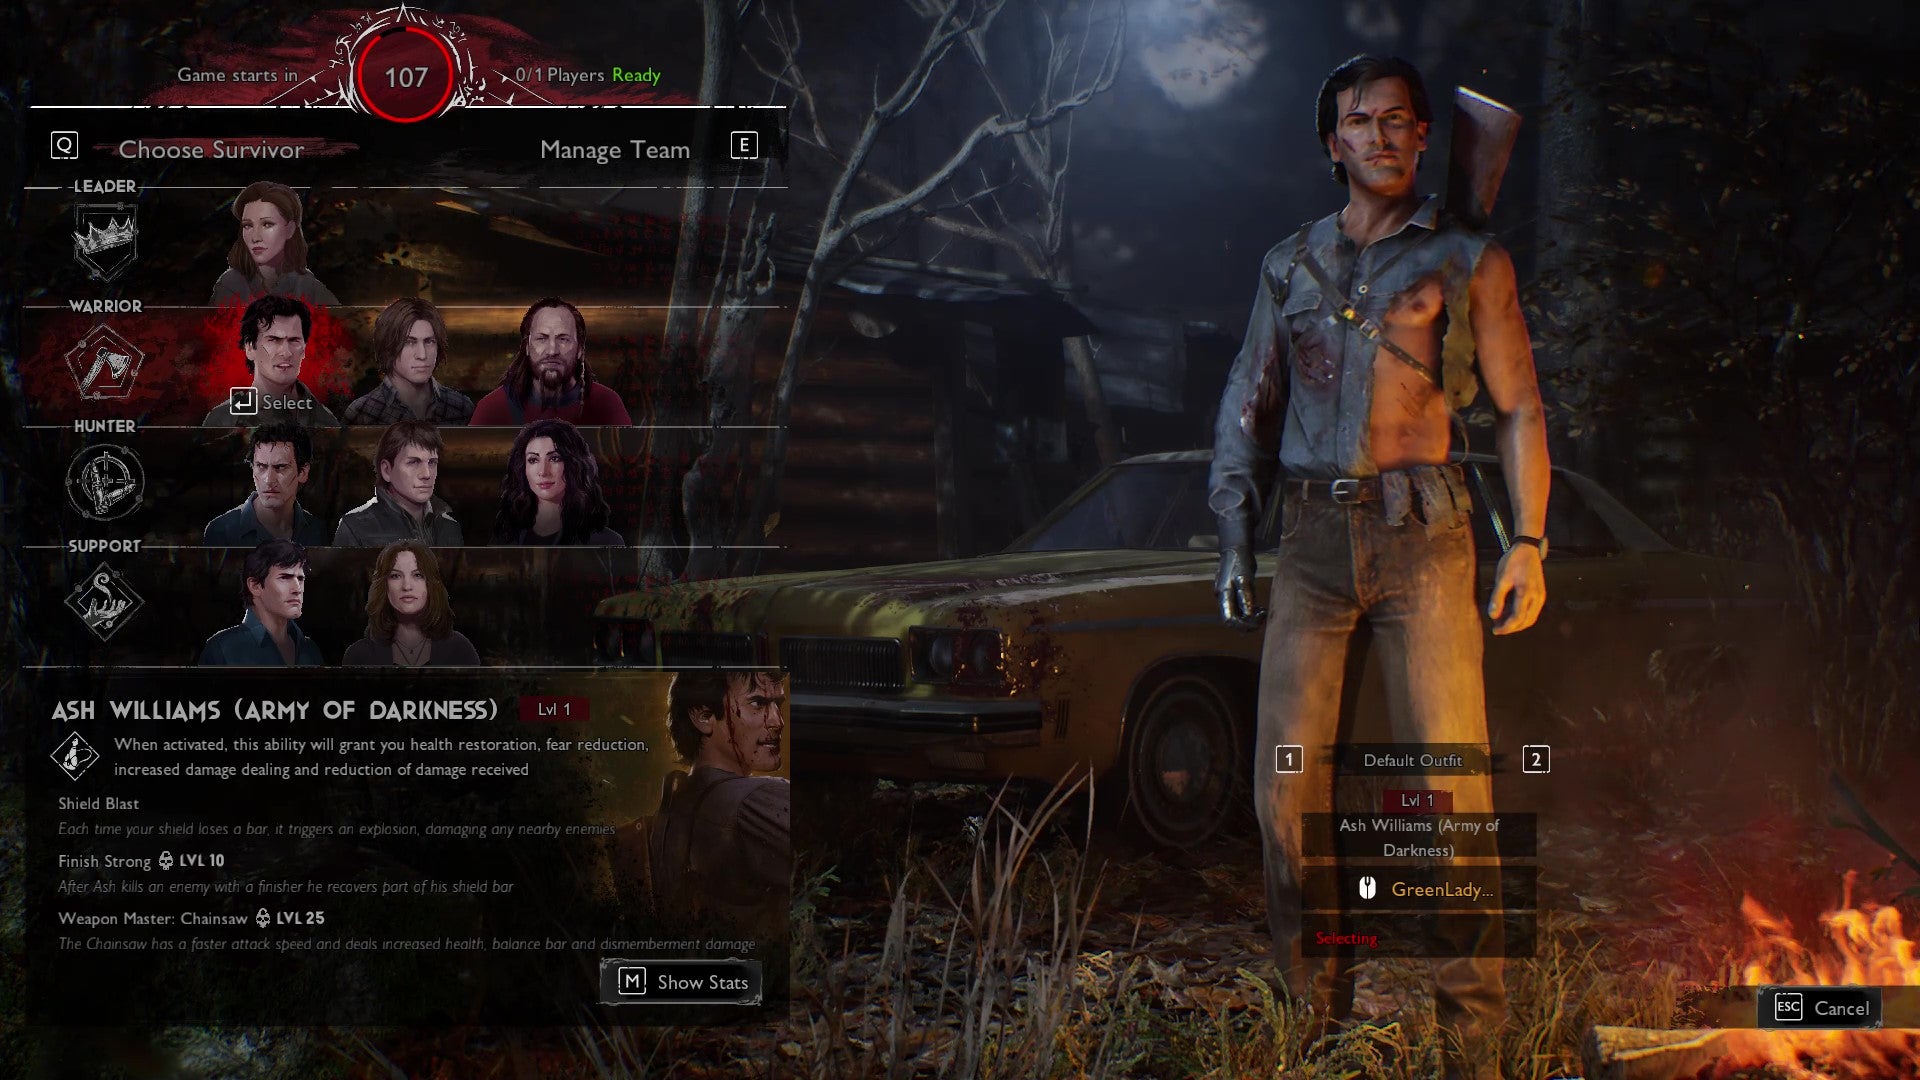 The player selection screen from Evil Dead: The Game, with Ash Williams (Army of Darkness) selected by a Survivor player.